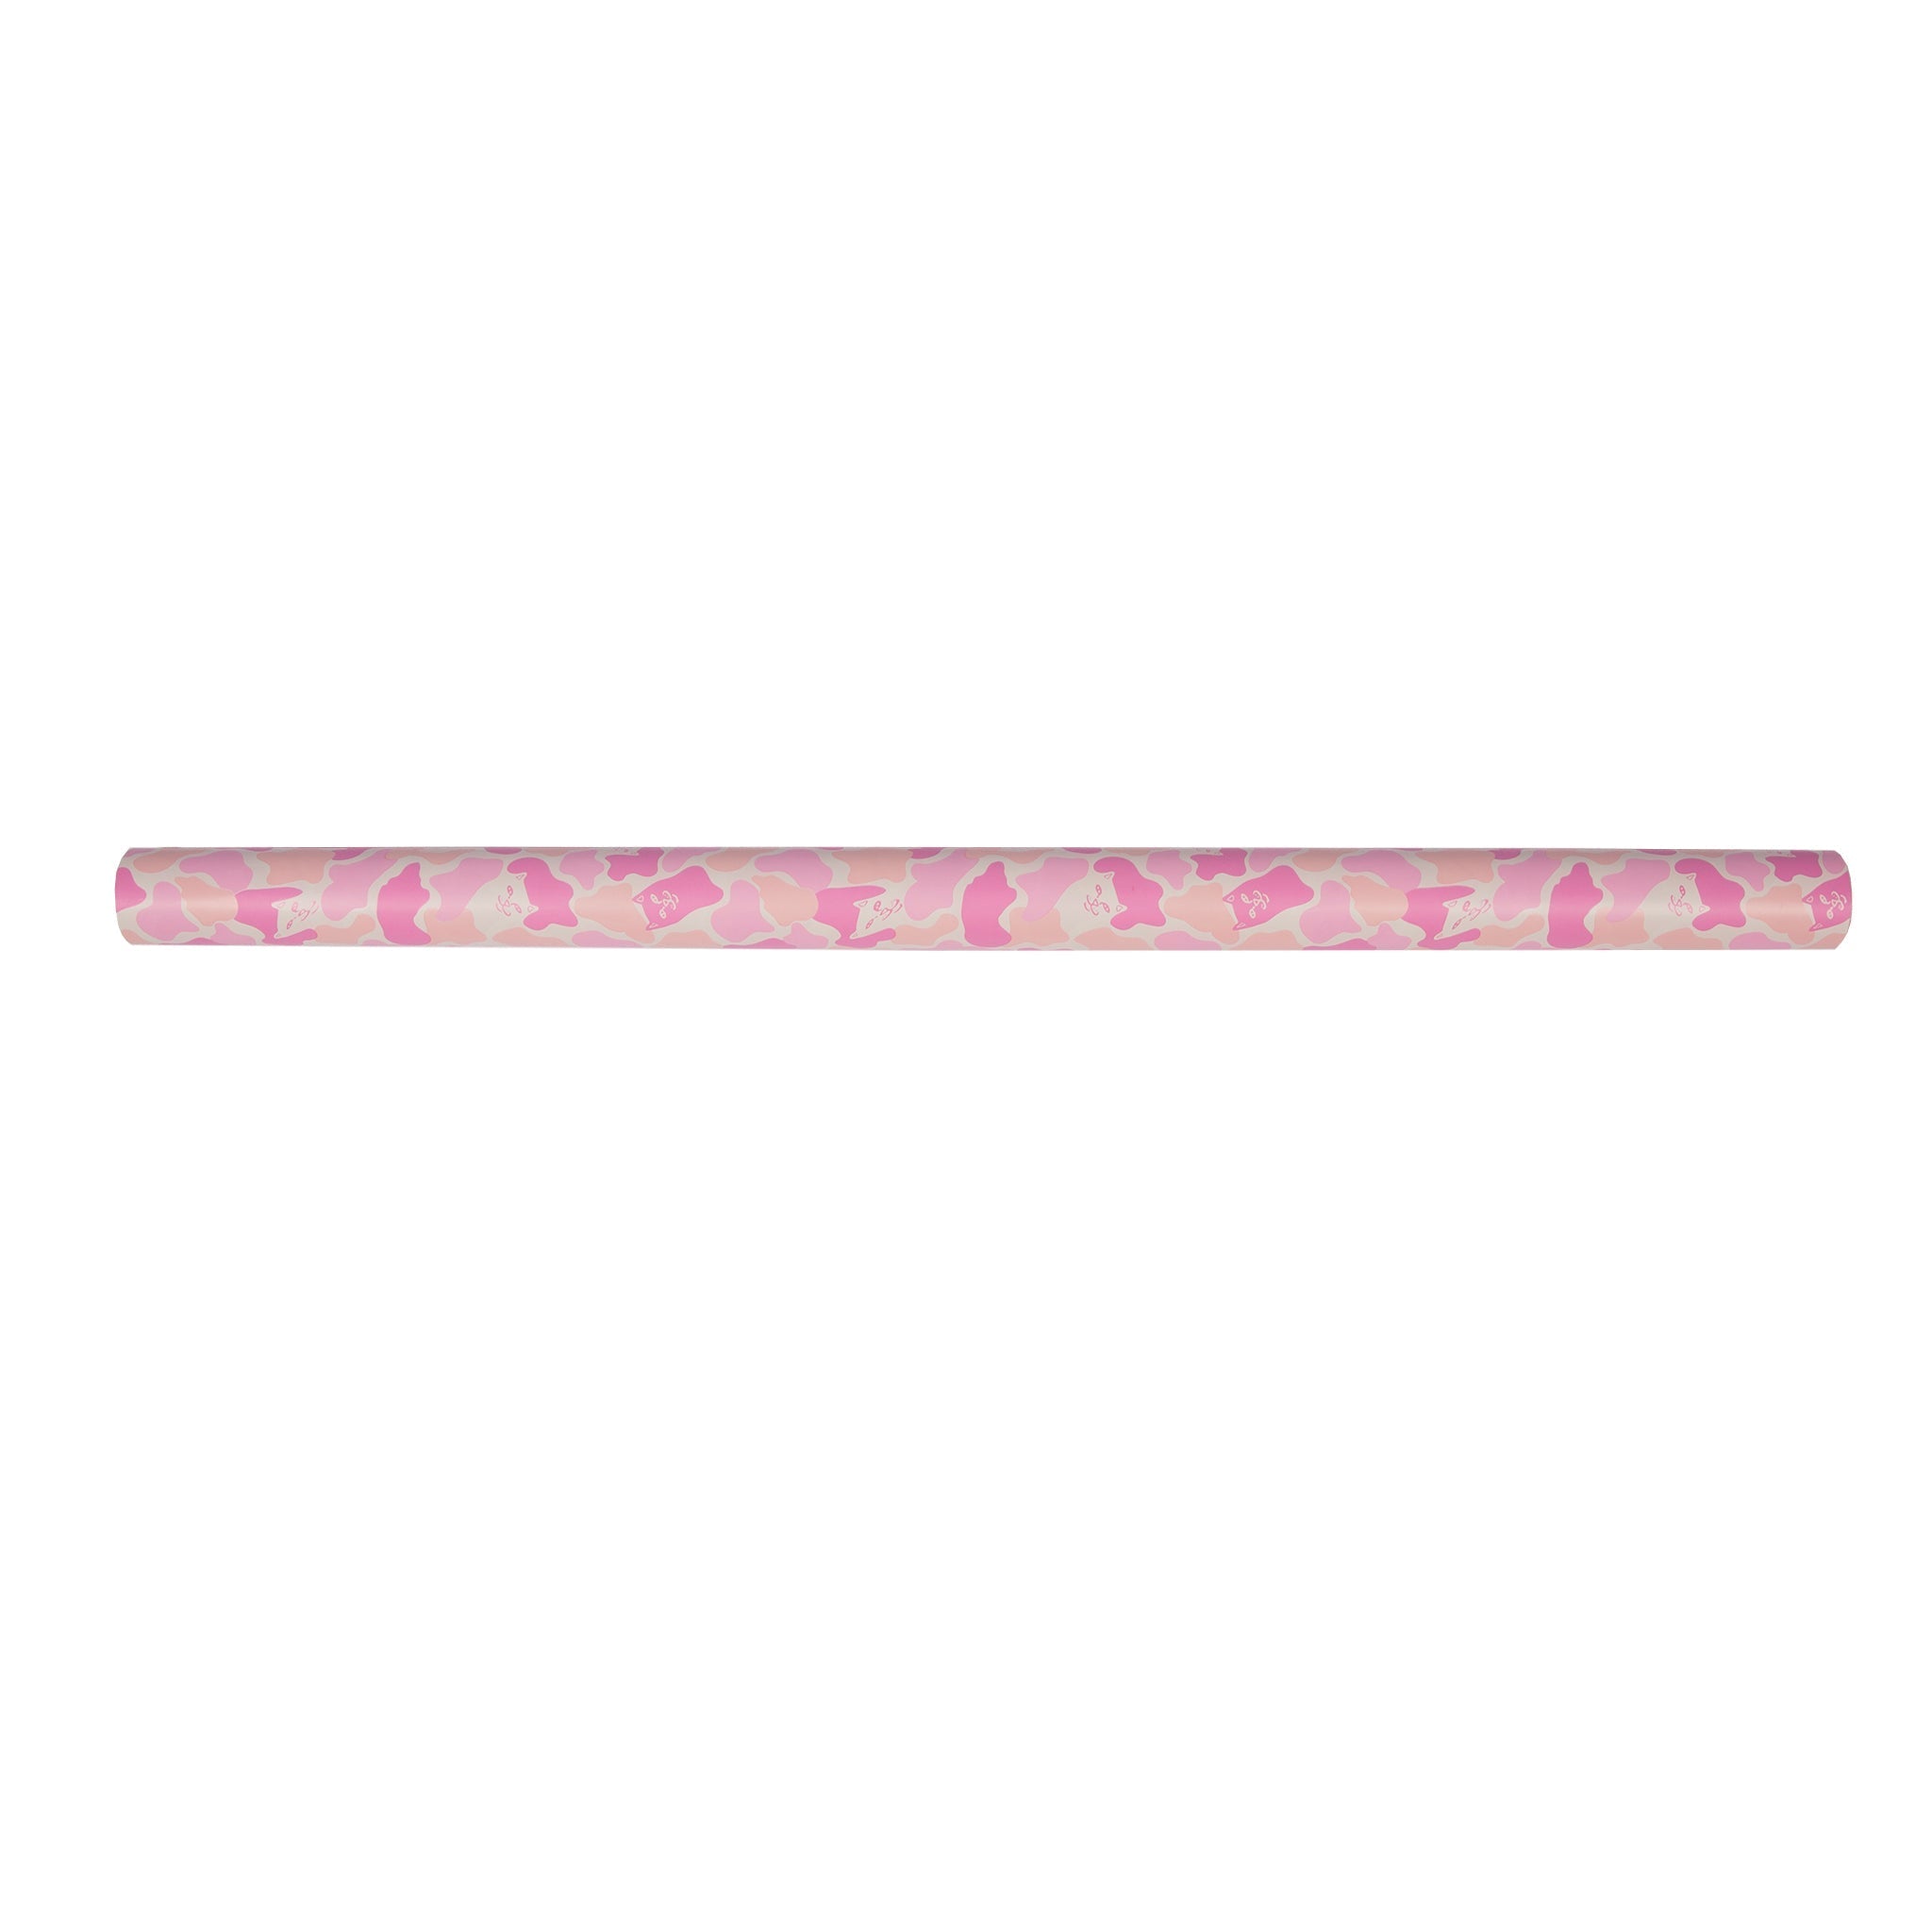 Nermal Camo Wrapping Paper (Pink Camo)